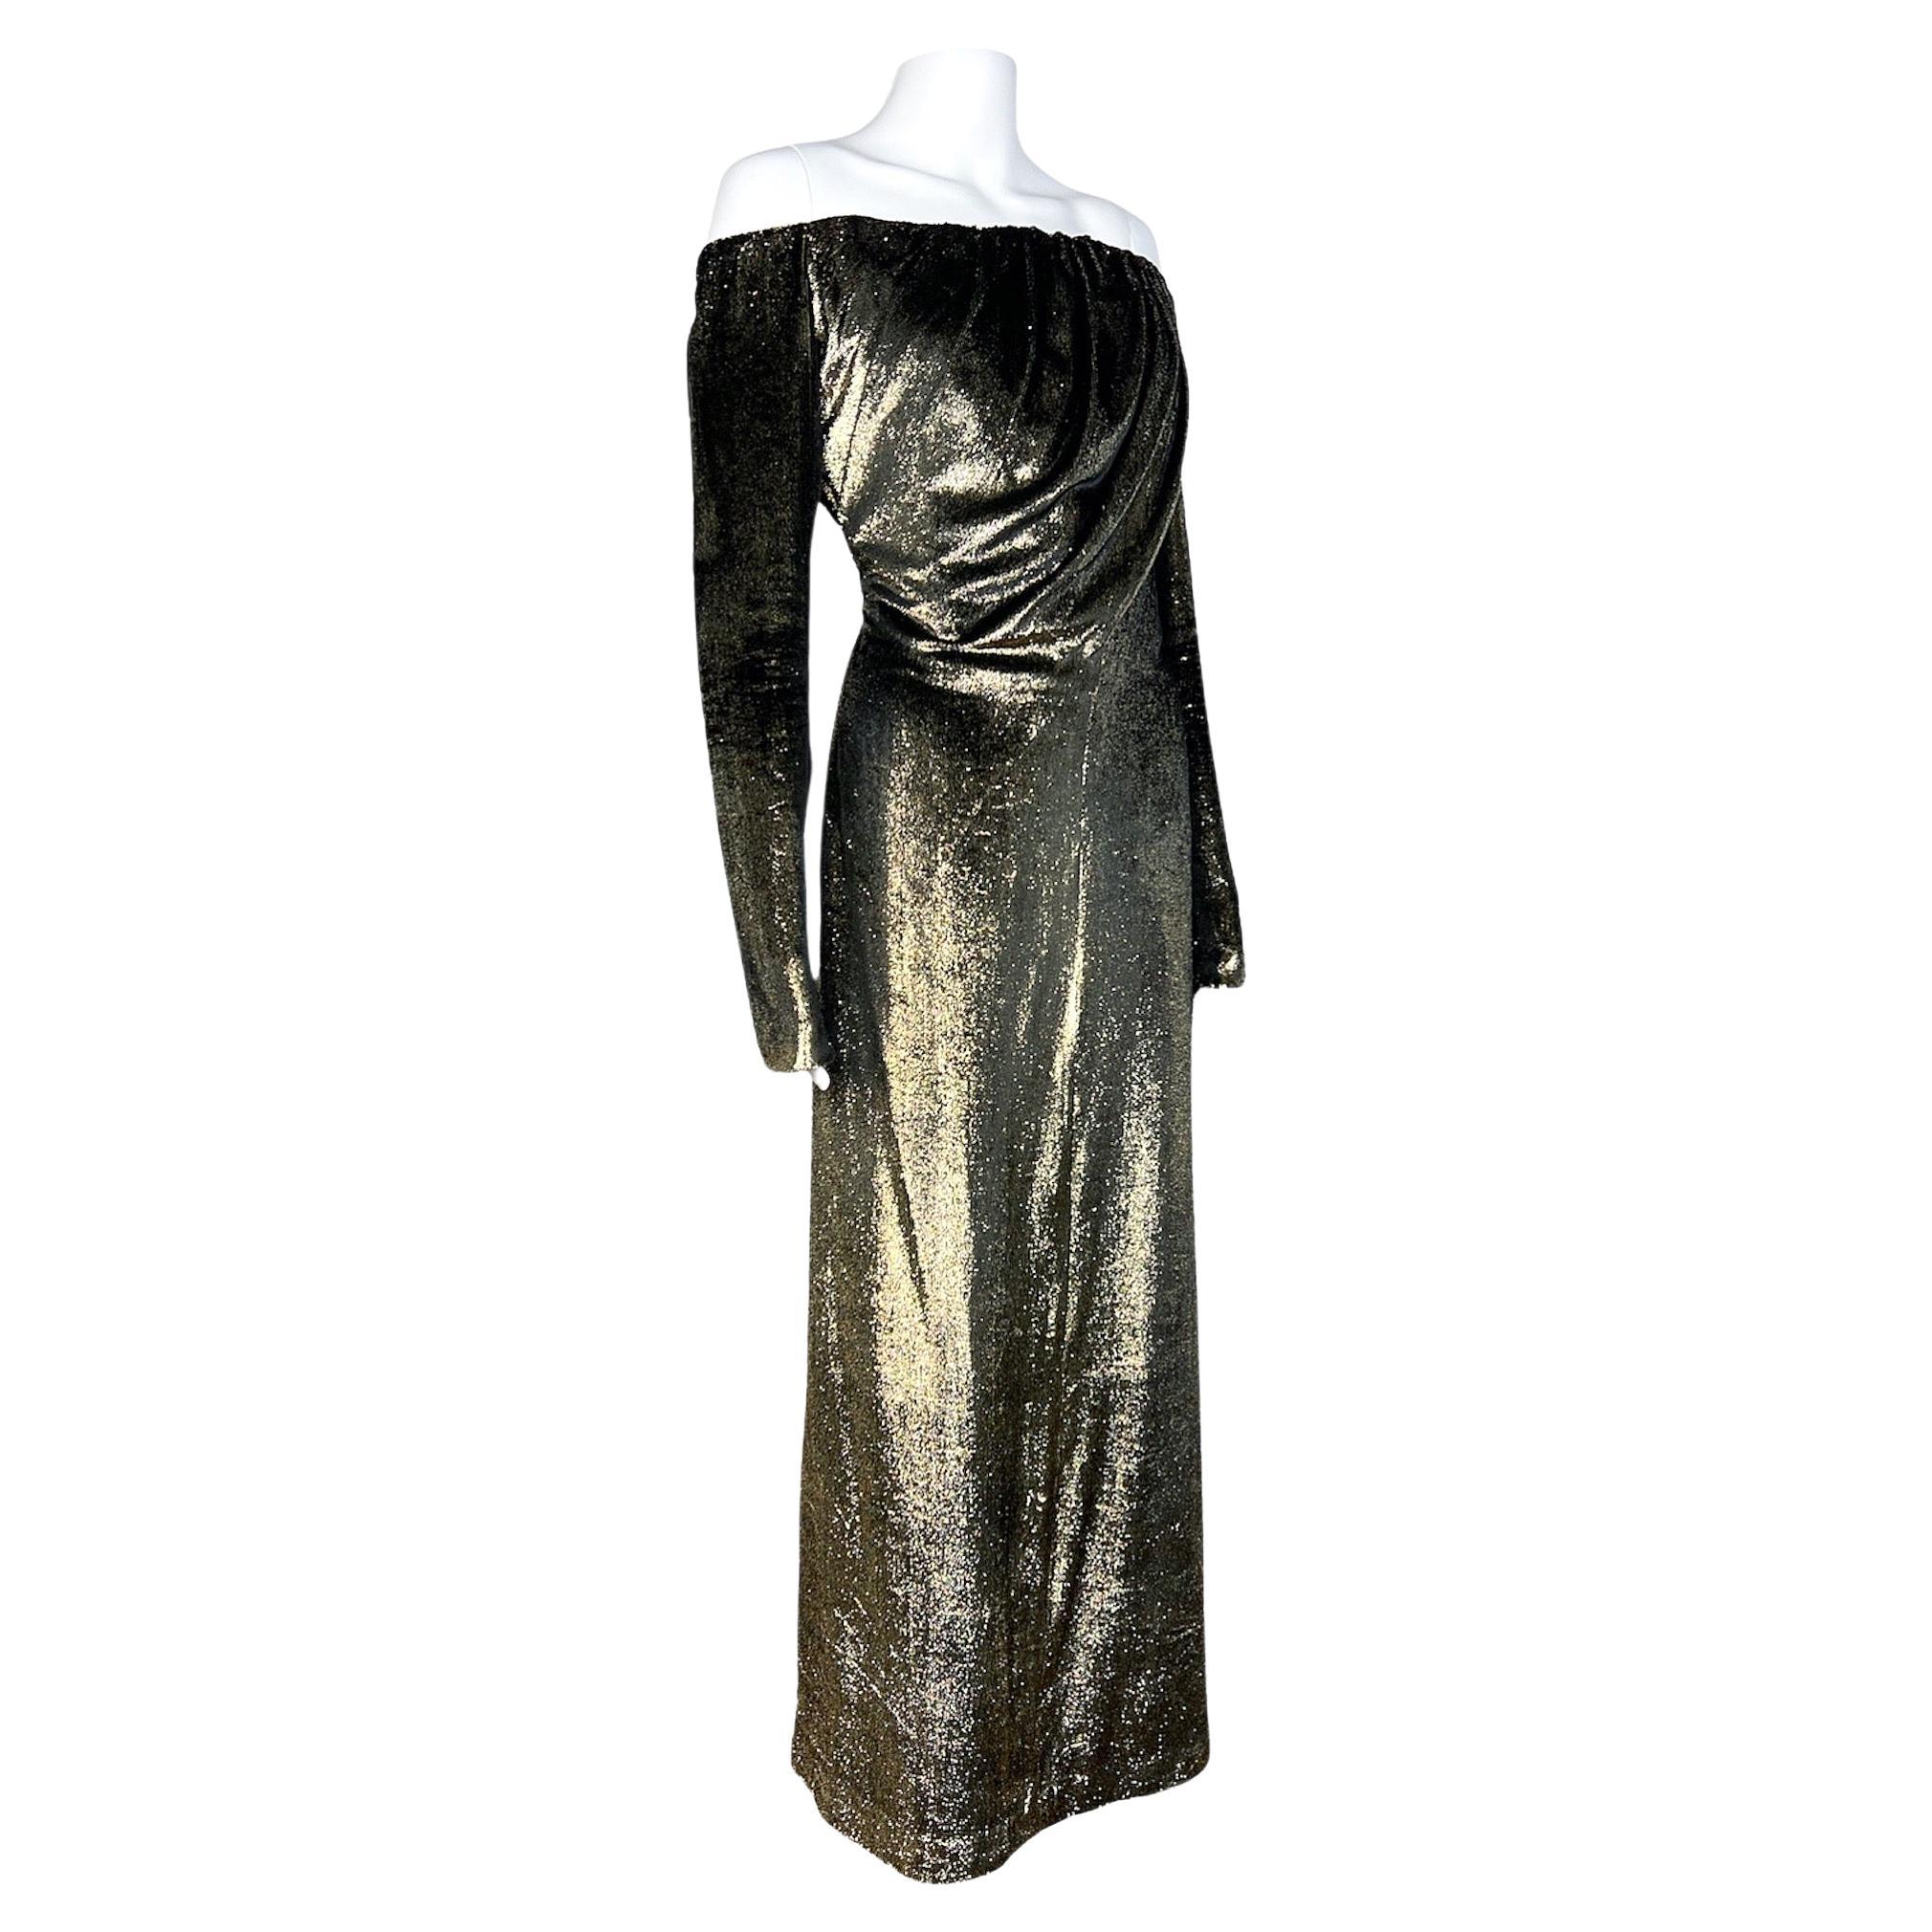 Yves Saint Laurent Spring 1989 Gown For Sale